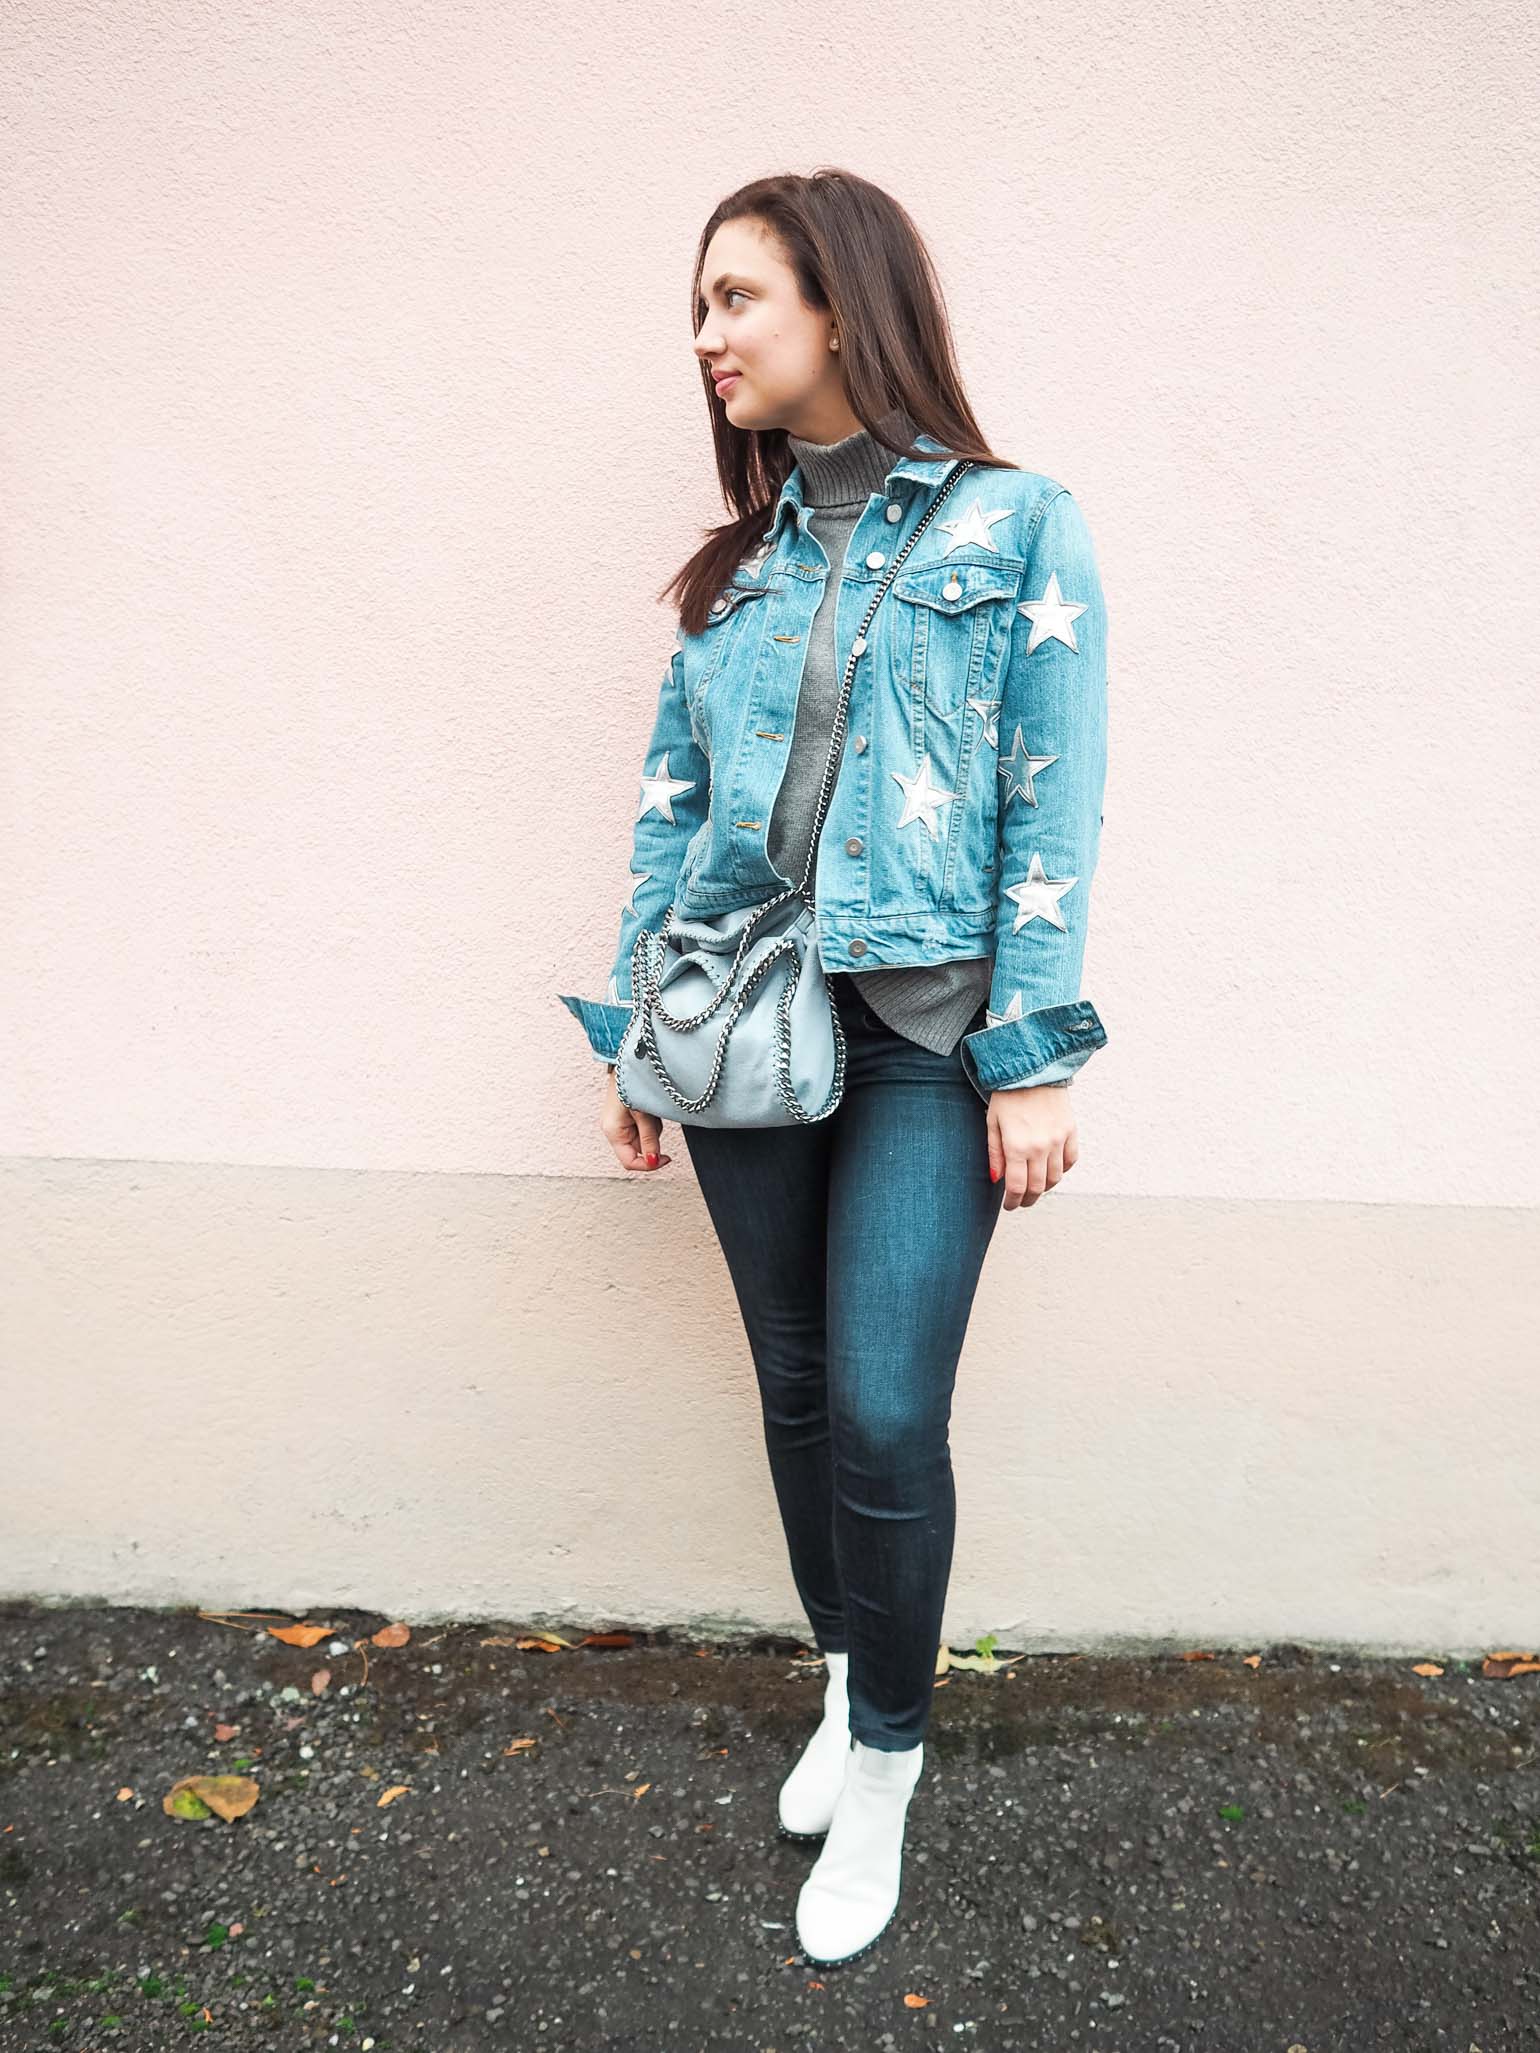 Cristina from The Brunette Nomad, Dallas fashion blogger living in Switzerland, shows you how to winterize your denim jacket using her favorite star printed denim jacket